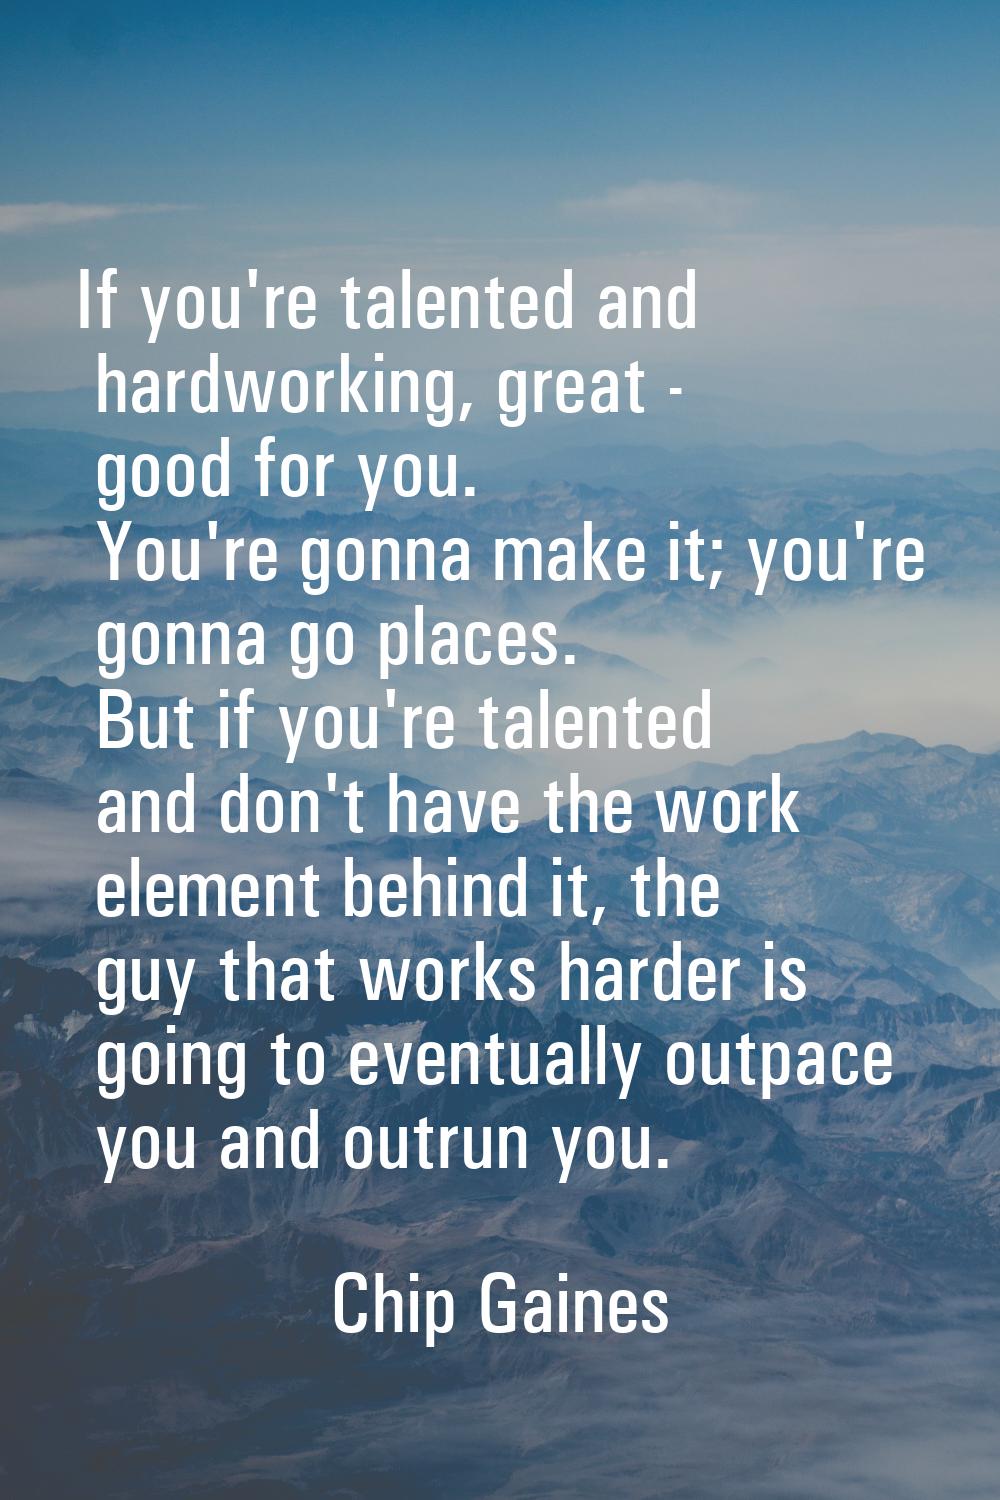 If you're talented and hardworking, great - good for you. You're gonna make it; you're gonna go pla